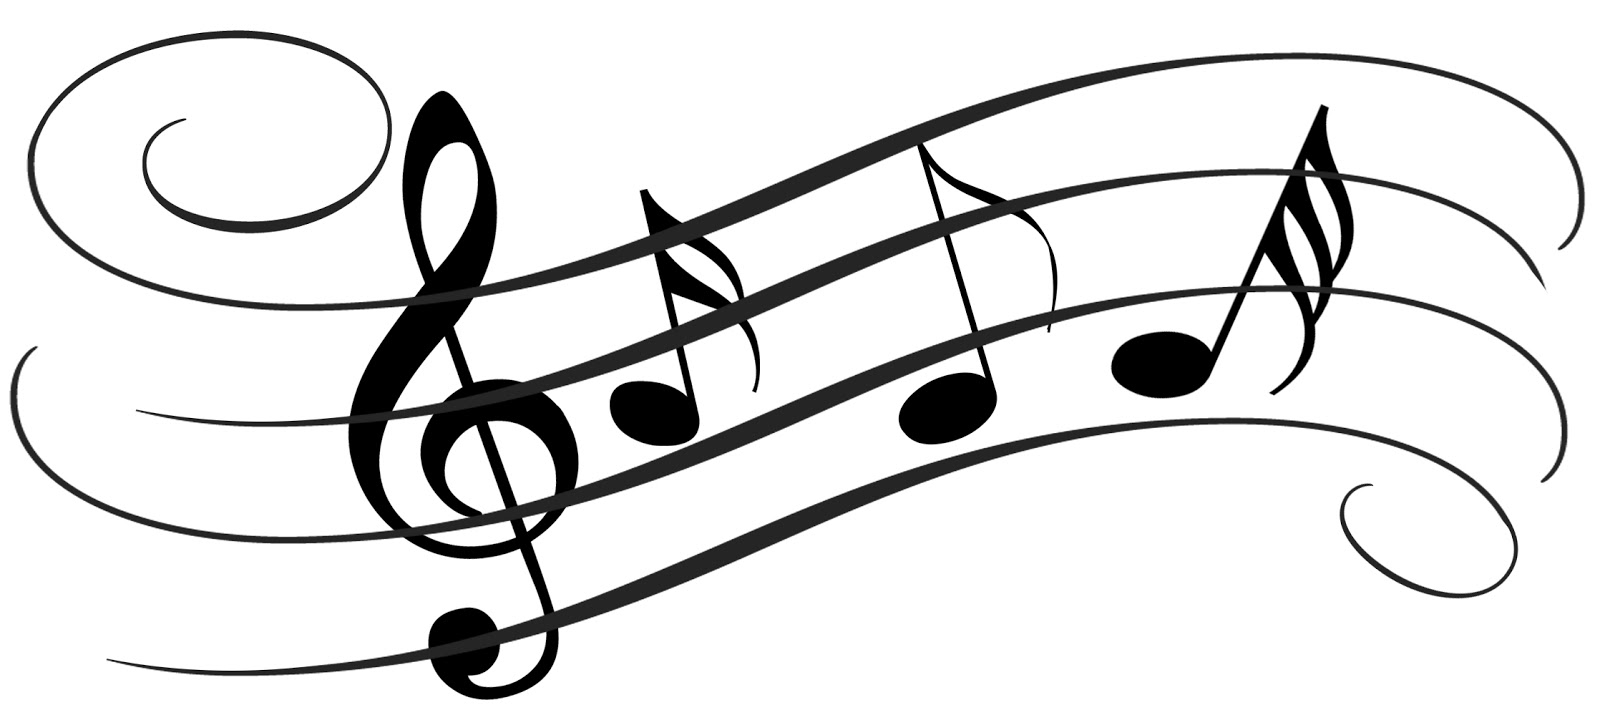 Music clipart vocal music. Free notes cliparts download